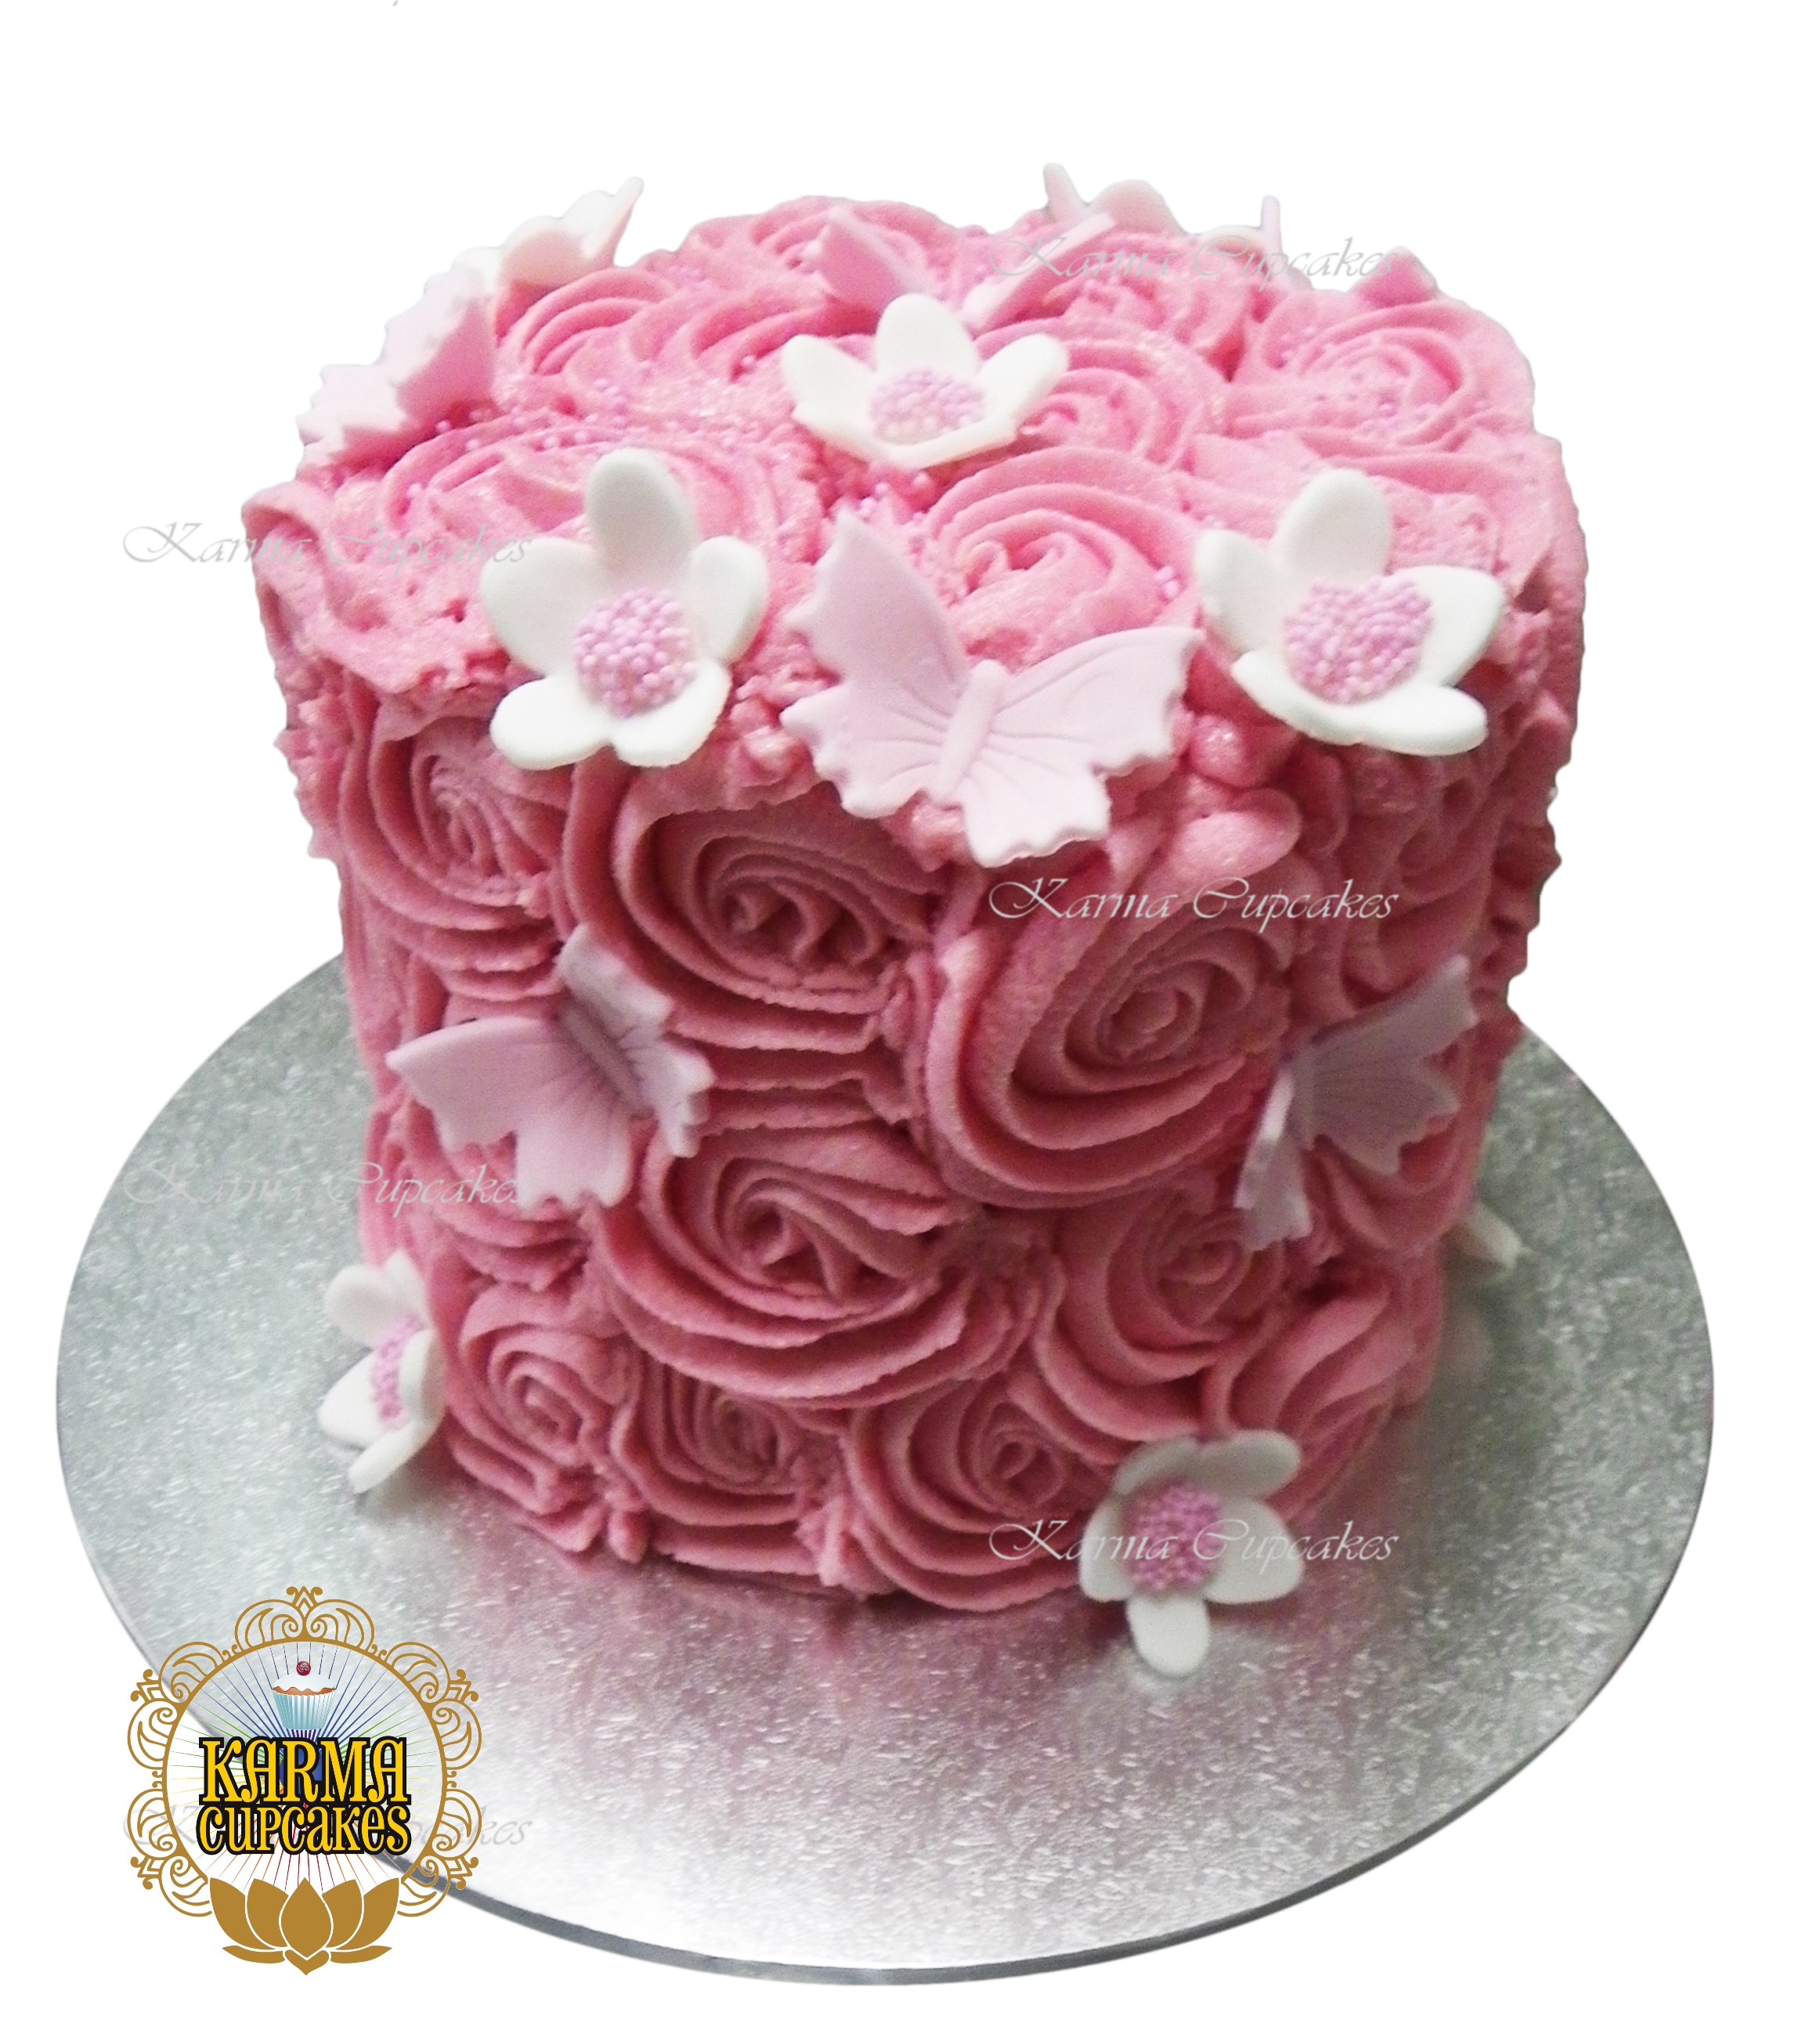 8" Rose Swirl Cake - choose your own colour/s